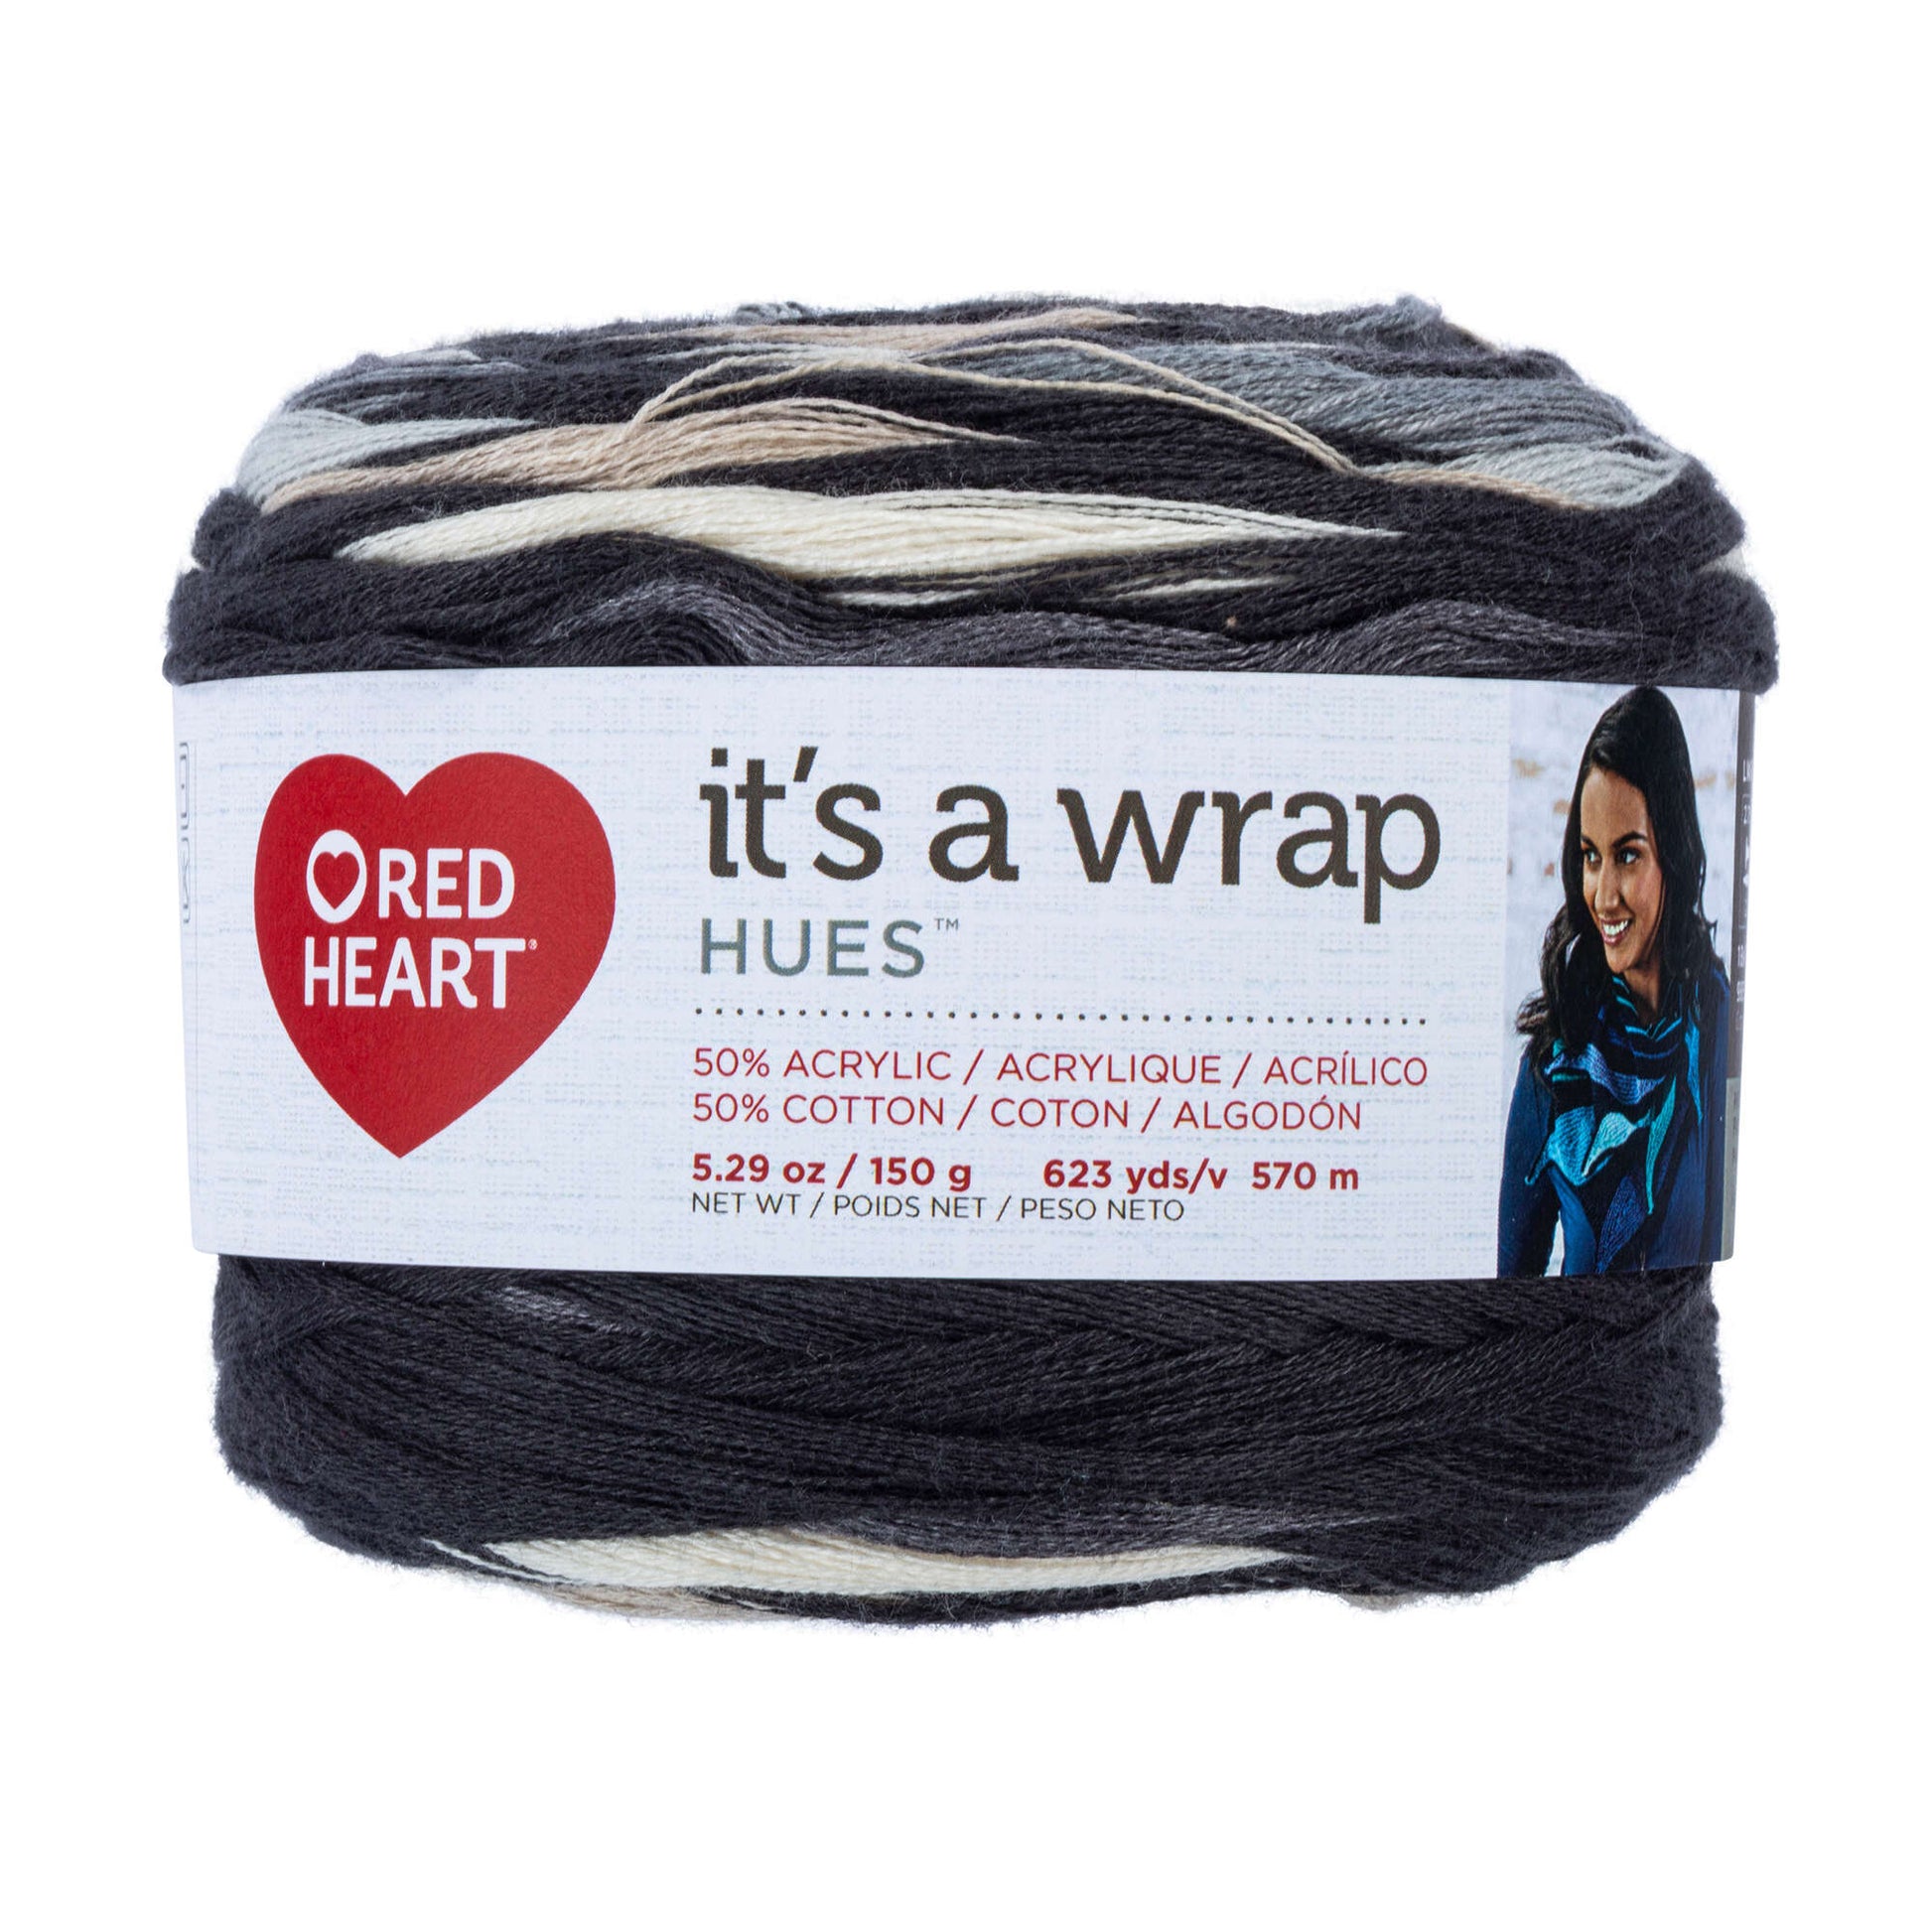 Red Heart It's A Wrap Hues Yarn - Clearance shades